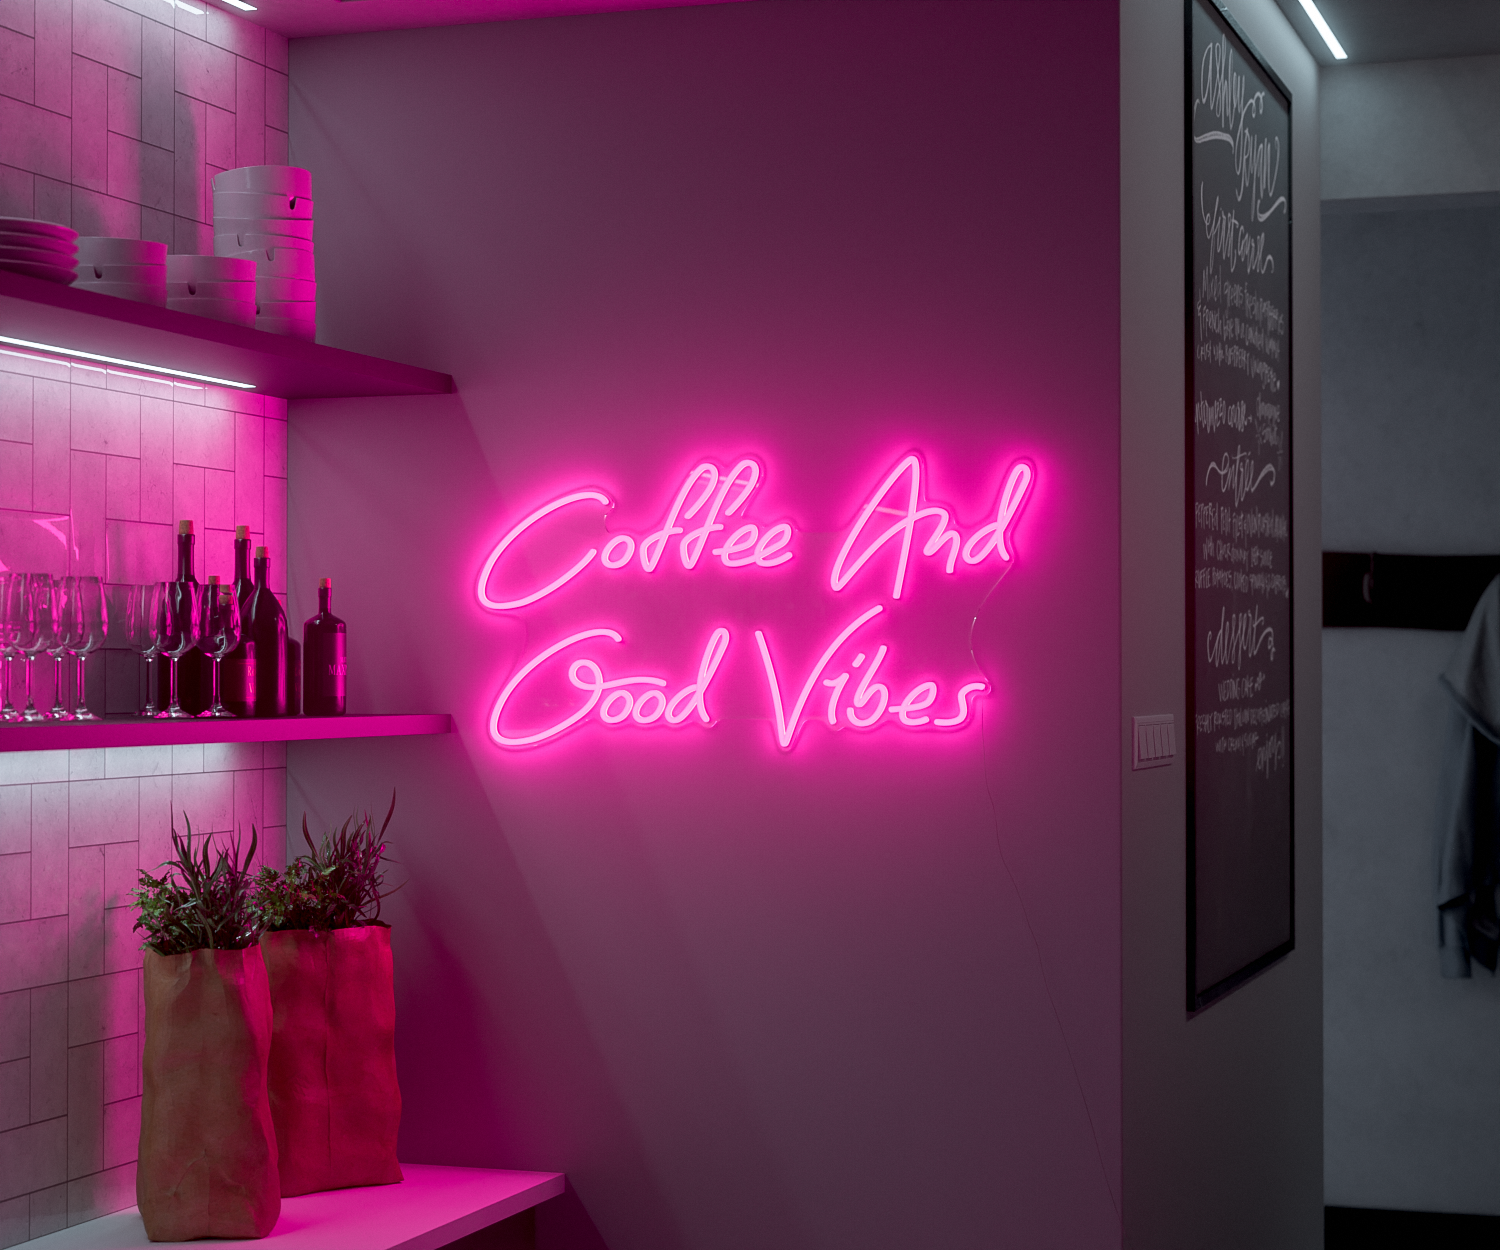 a pink neon sign in a cafe that says "coffee and good vibes"